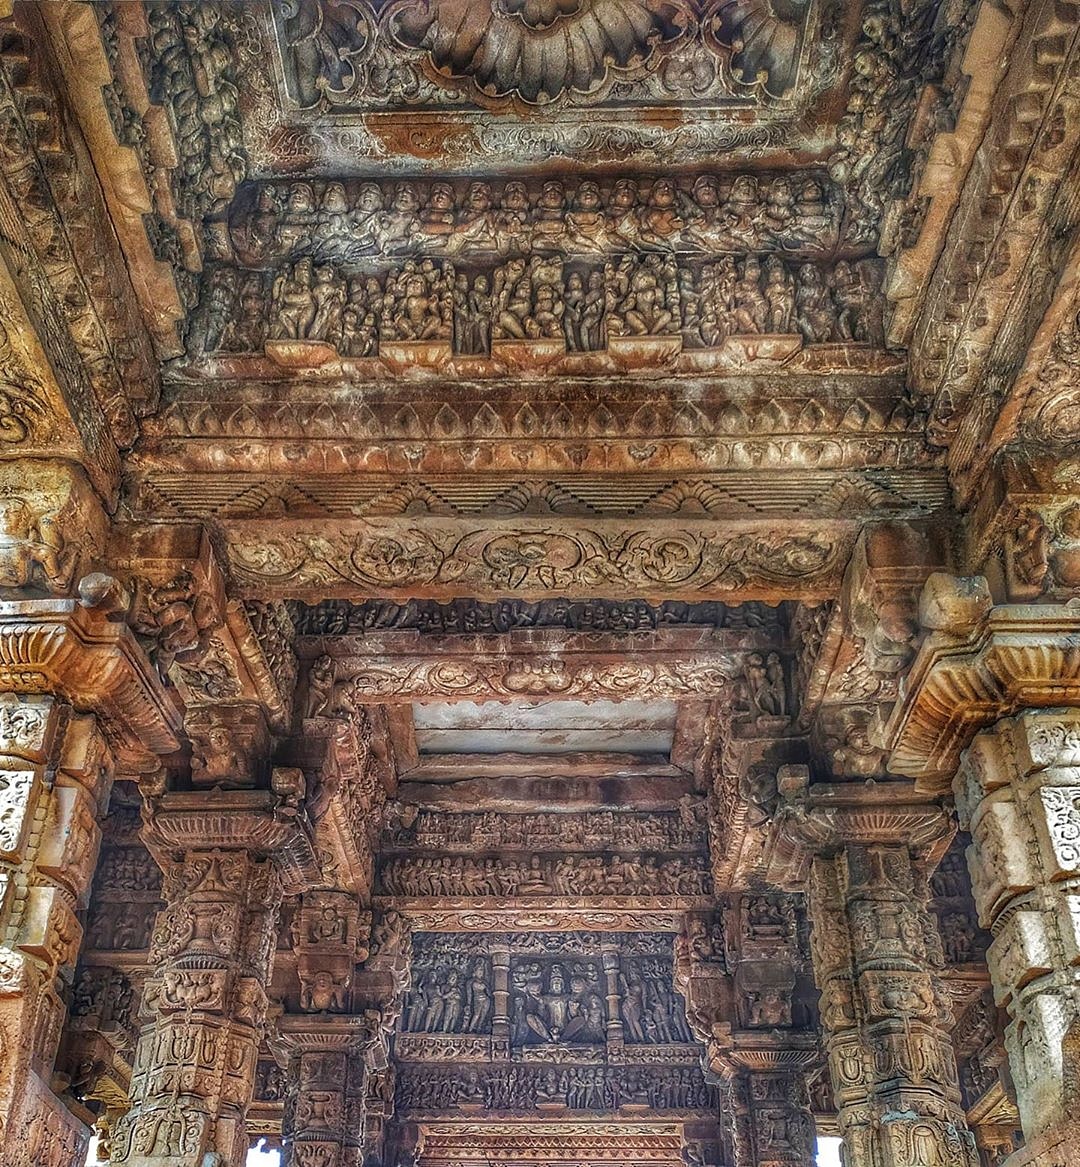 Unbelievable Imagination and Craftsmanship of our Immortal culturalSadly t temple no longer remains but t grandeur of Mukh Mandap is proof enough to imagine how amazing t entire complex might have been at its glorious daysZoom it Friends,see t Intricate, exquisite art work